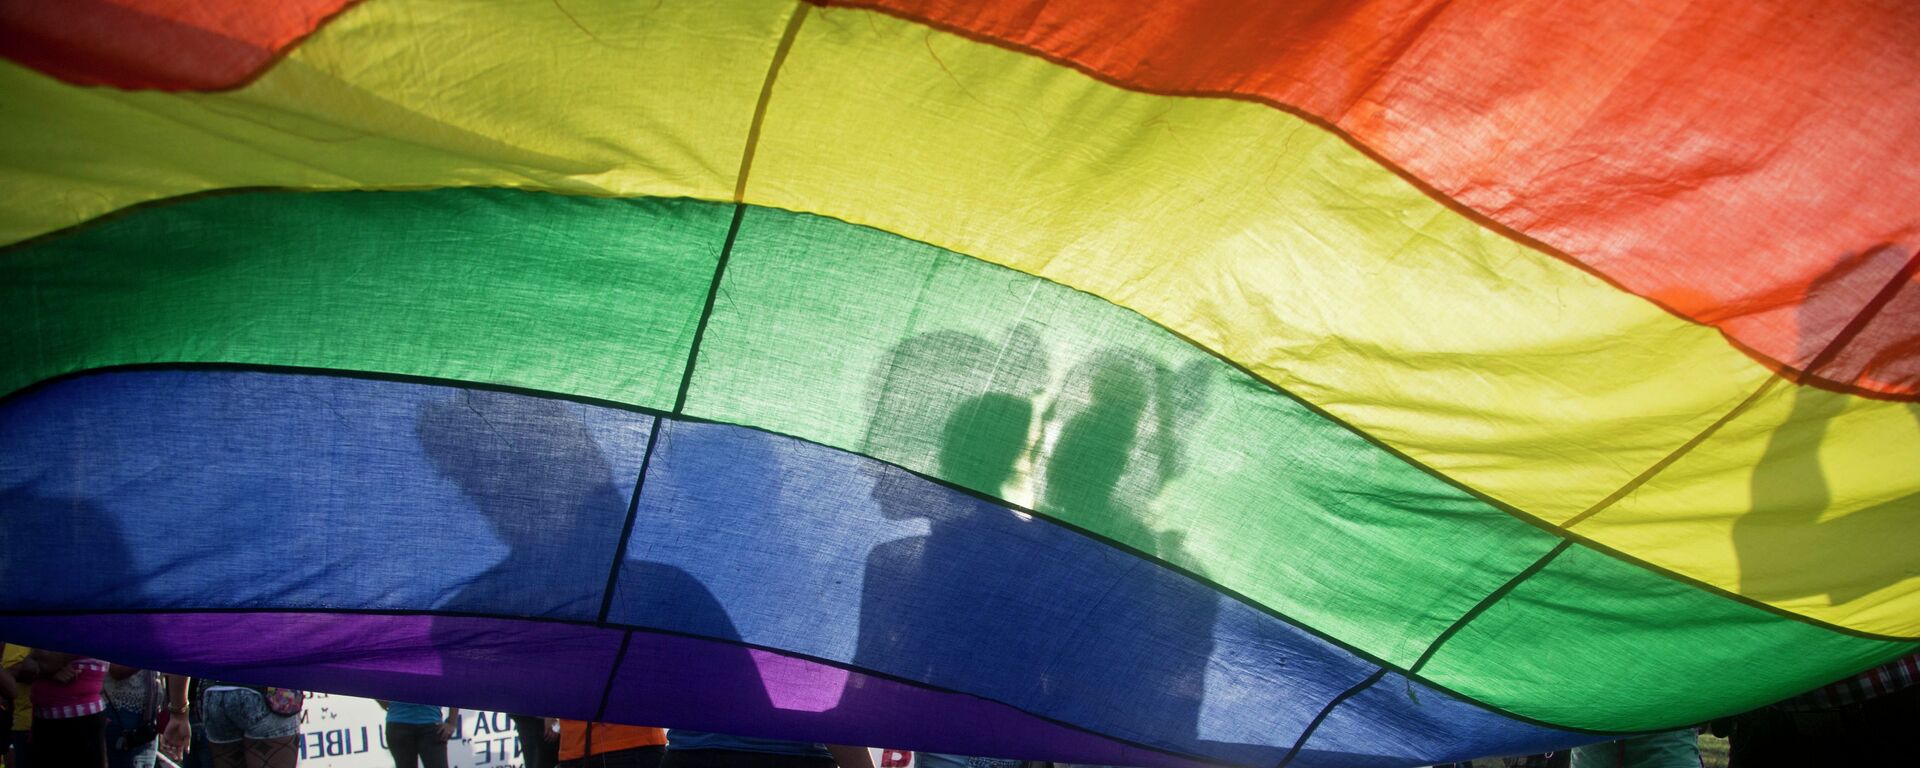 Members of the LGBT movement hold a gay pride flag as they attend a march to mark the International Day Against Homophobia in Managua, Nicaragua, Sunday, May 17, 2015. - Sputnik Mundo, 1920, 12.03.2021